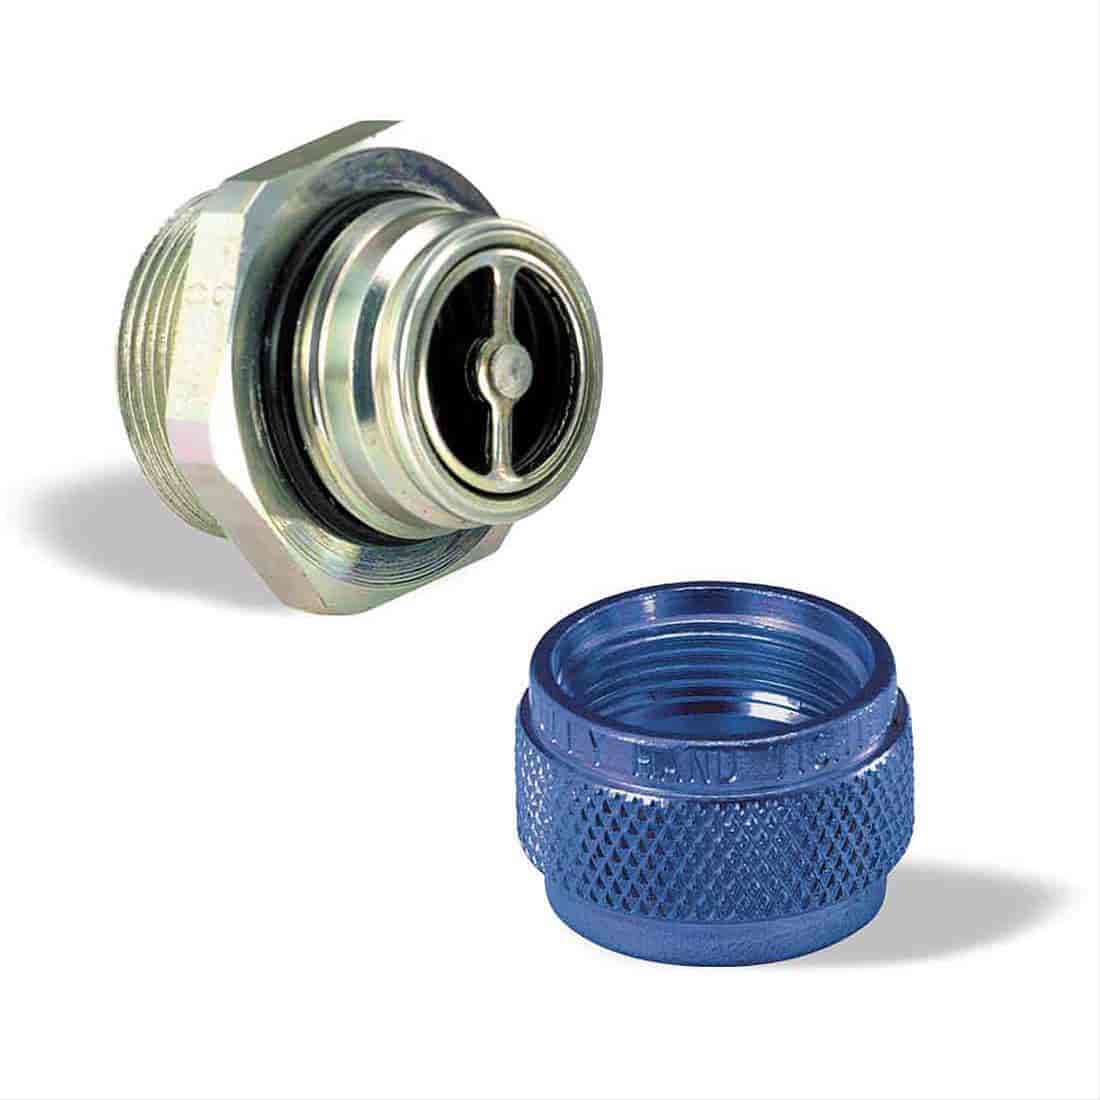 Male Half 1-1/16 -12 UN -2A Thread Size 1.54in.x.96in. 1-1/2in. Hex Size - Quick-Drain Oil Pan Coupling